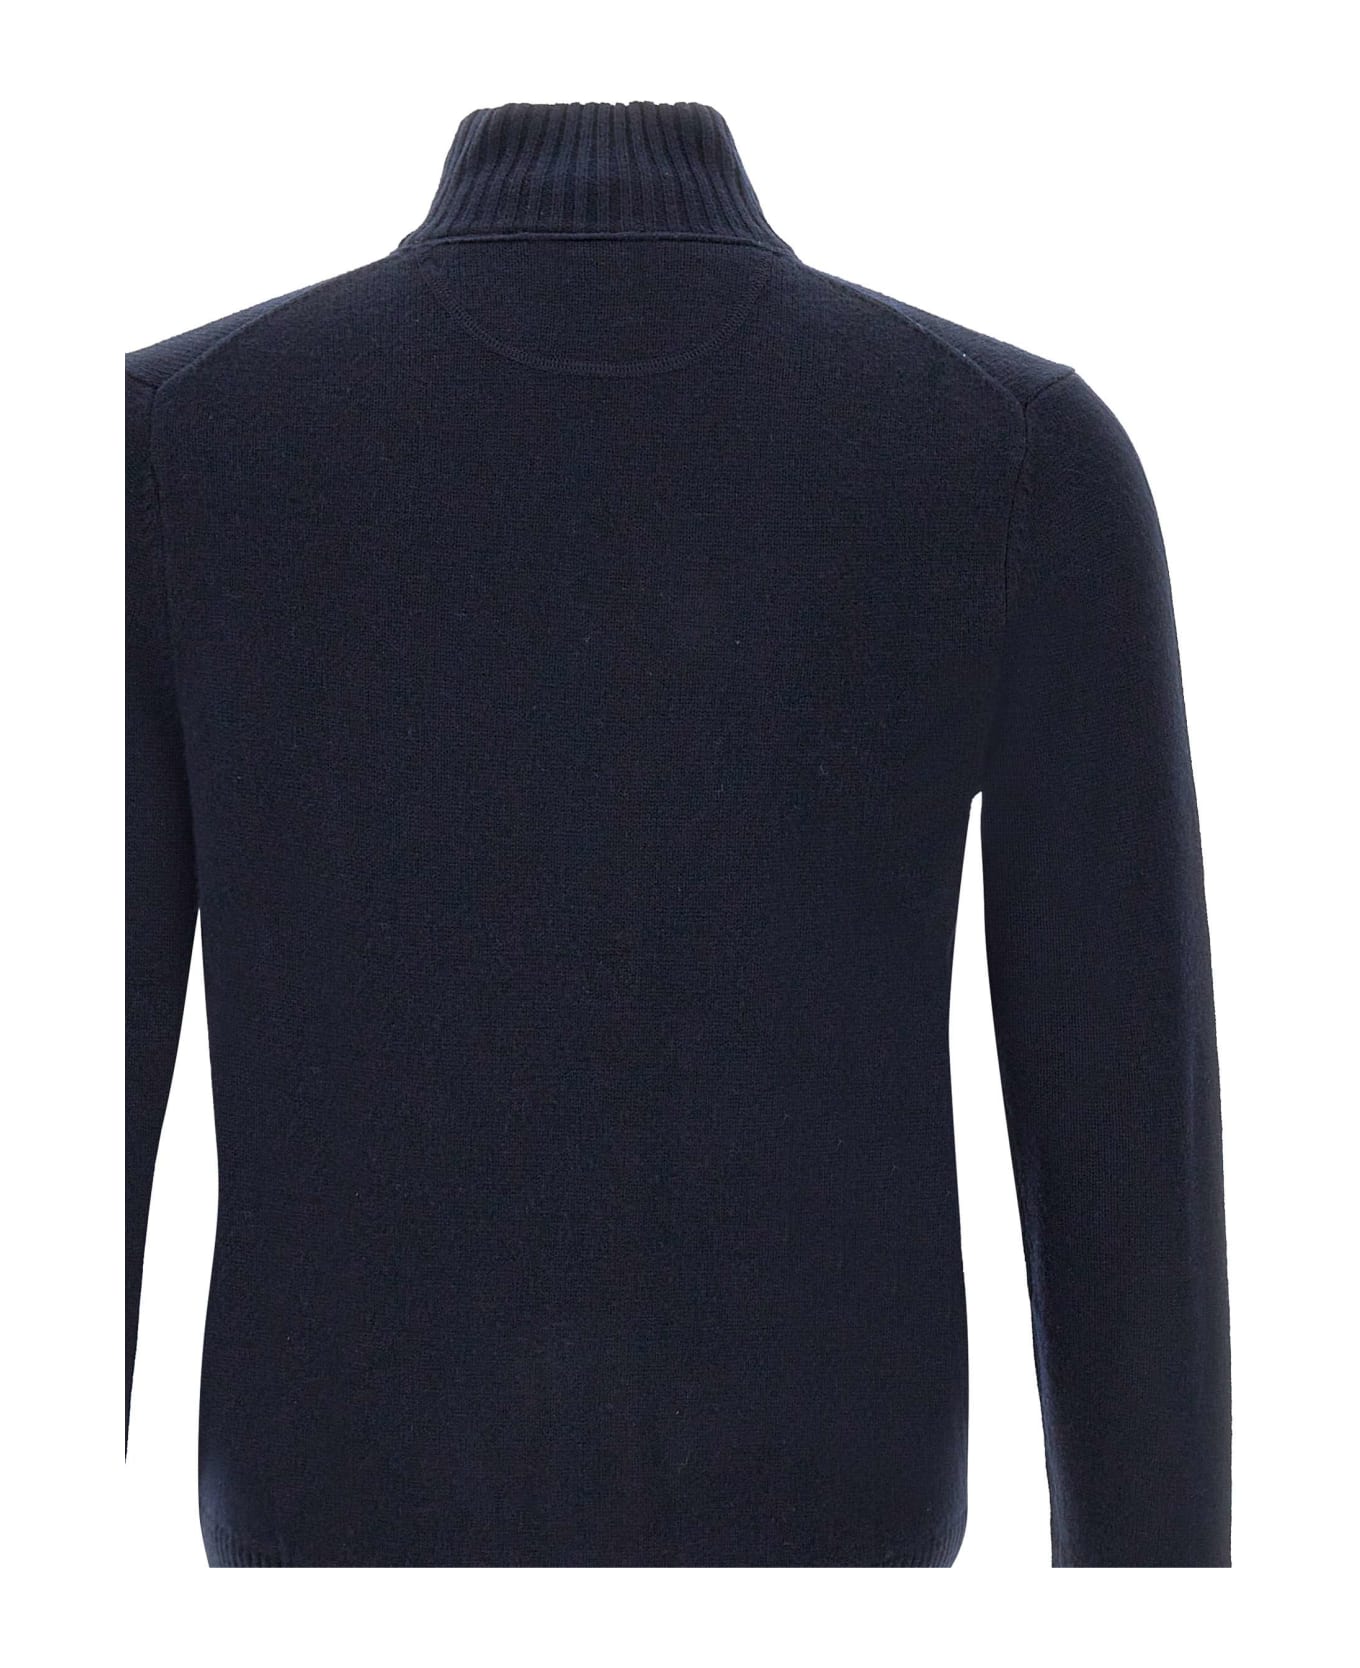 Sun 68 'solid Color' Wool, Viscose And Cashmere Cardigan Cardigan - NAVY BLUE